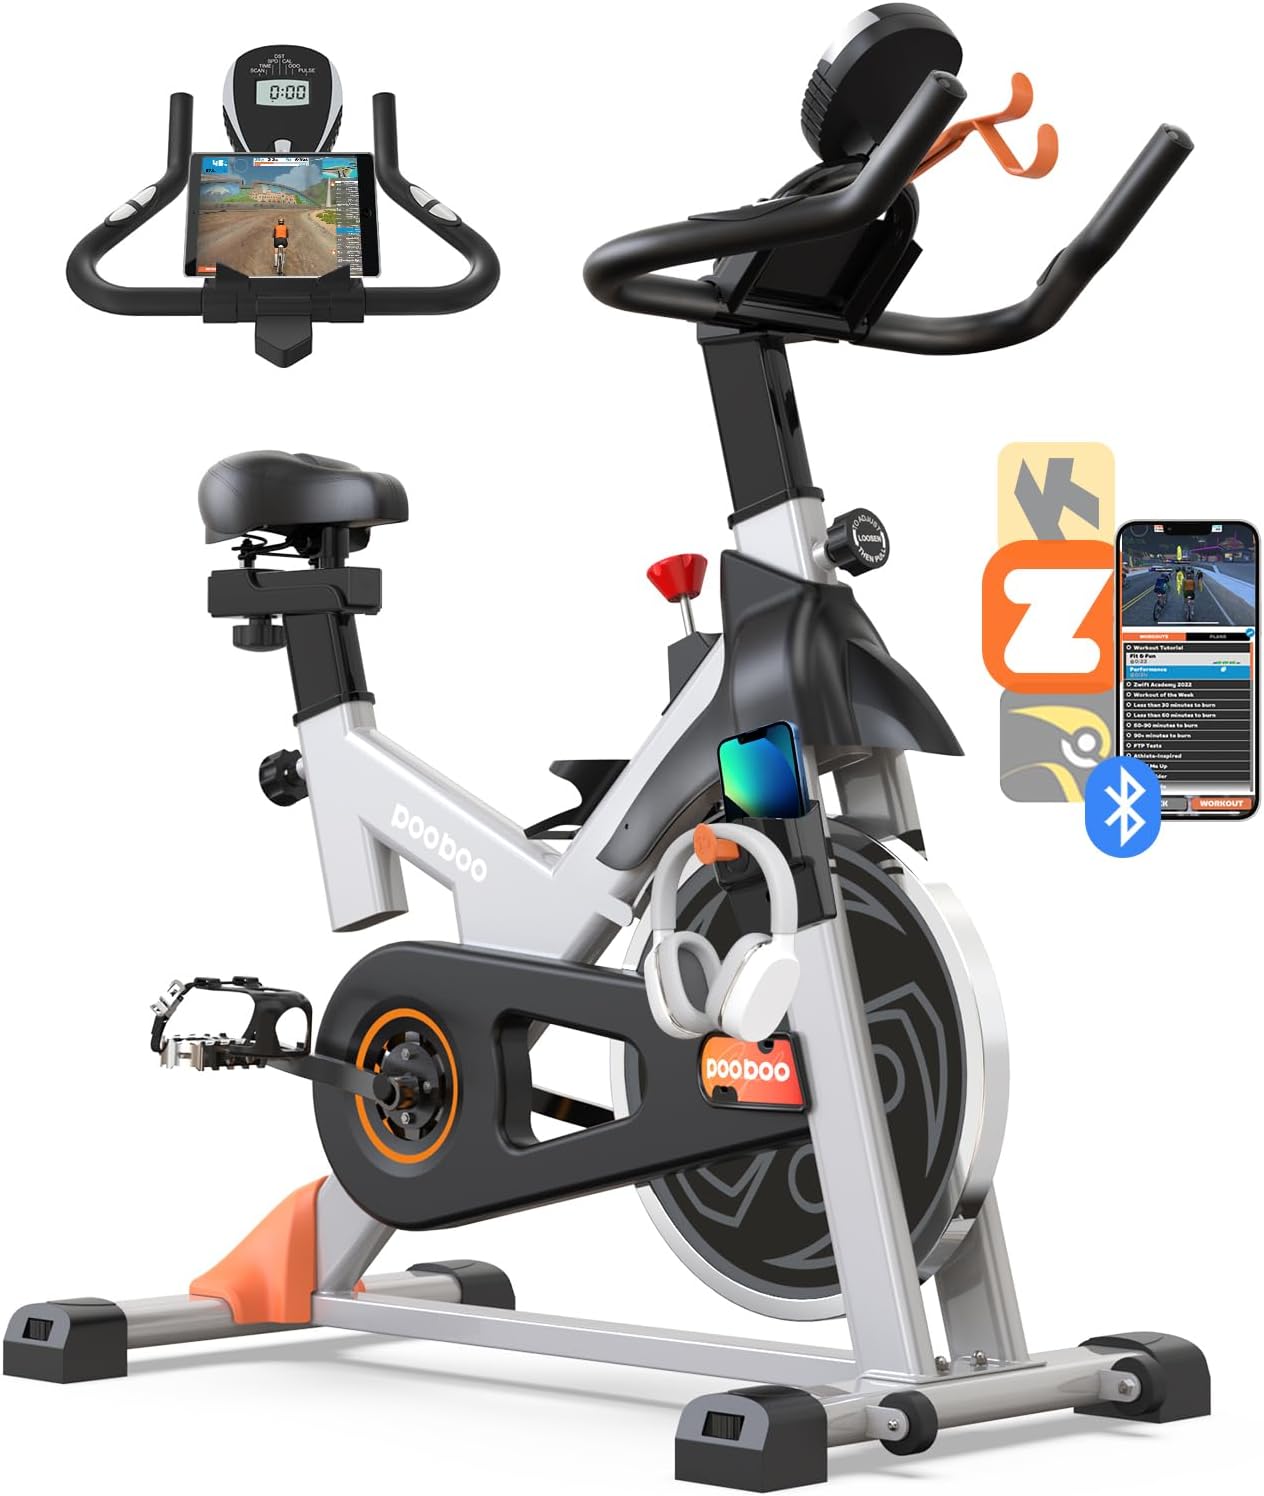 pooboo Exercise Bike, Adjustable Magnetic Resistance Silent Belt Drive, Indoor Cycling Bike for Home Cardio Gym, Fitness Stationary Bike Machine with 350lbs/300lbs Weight Capacity, Monitor with Pulse  Ipad Mount Upgraded Version Seat